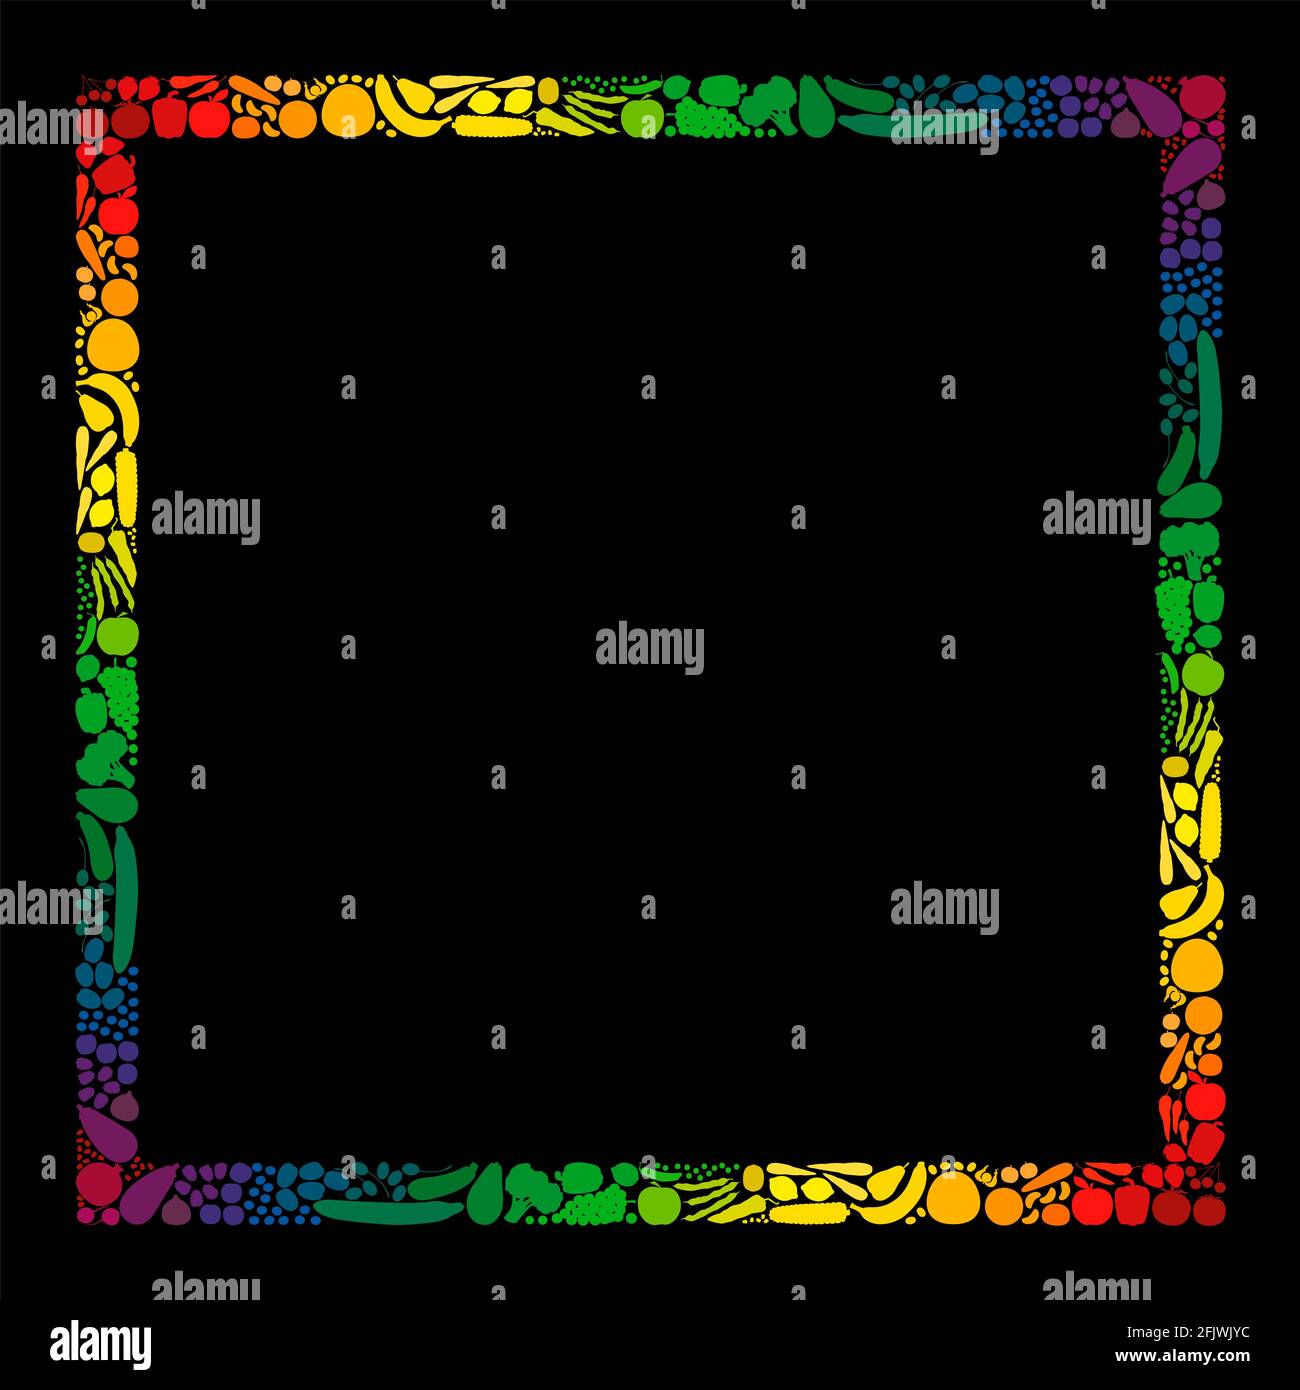 Vegetables and fruits frame, square format, rainbow colored stripes -illustration on black background. Stock Photo